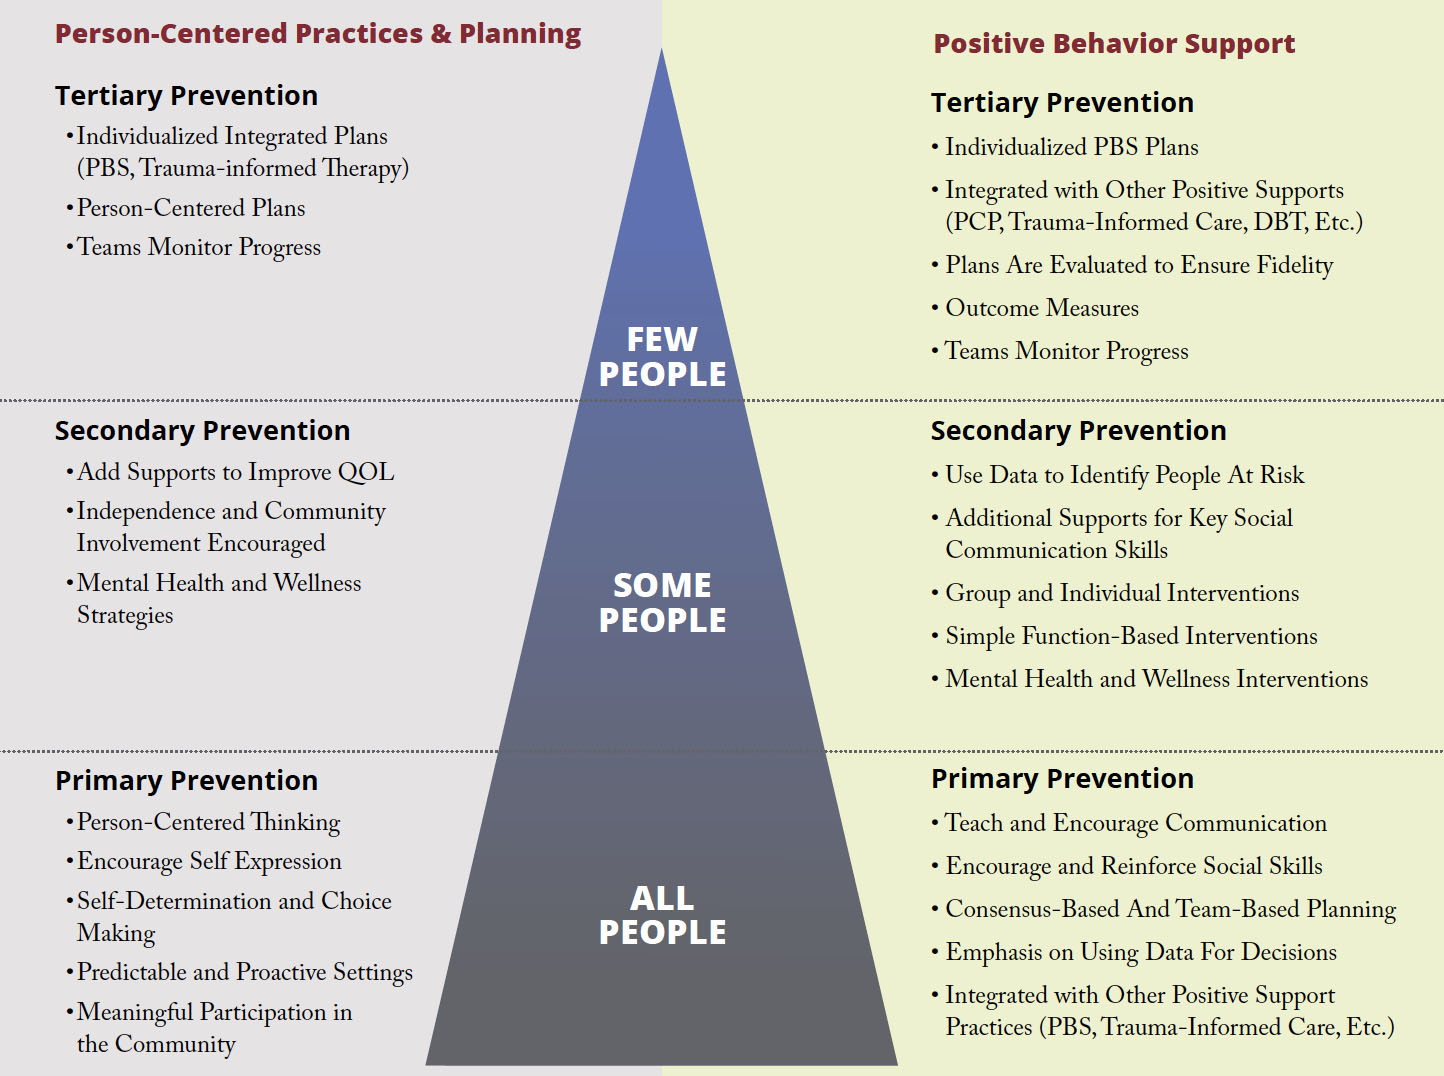 Three tiered pyramid of person centered planning and positive behavior support. At the base is all people, in the center is some people, and at the top is few people. 